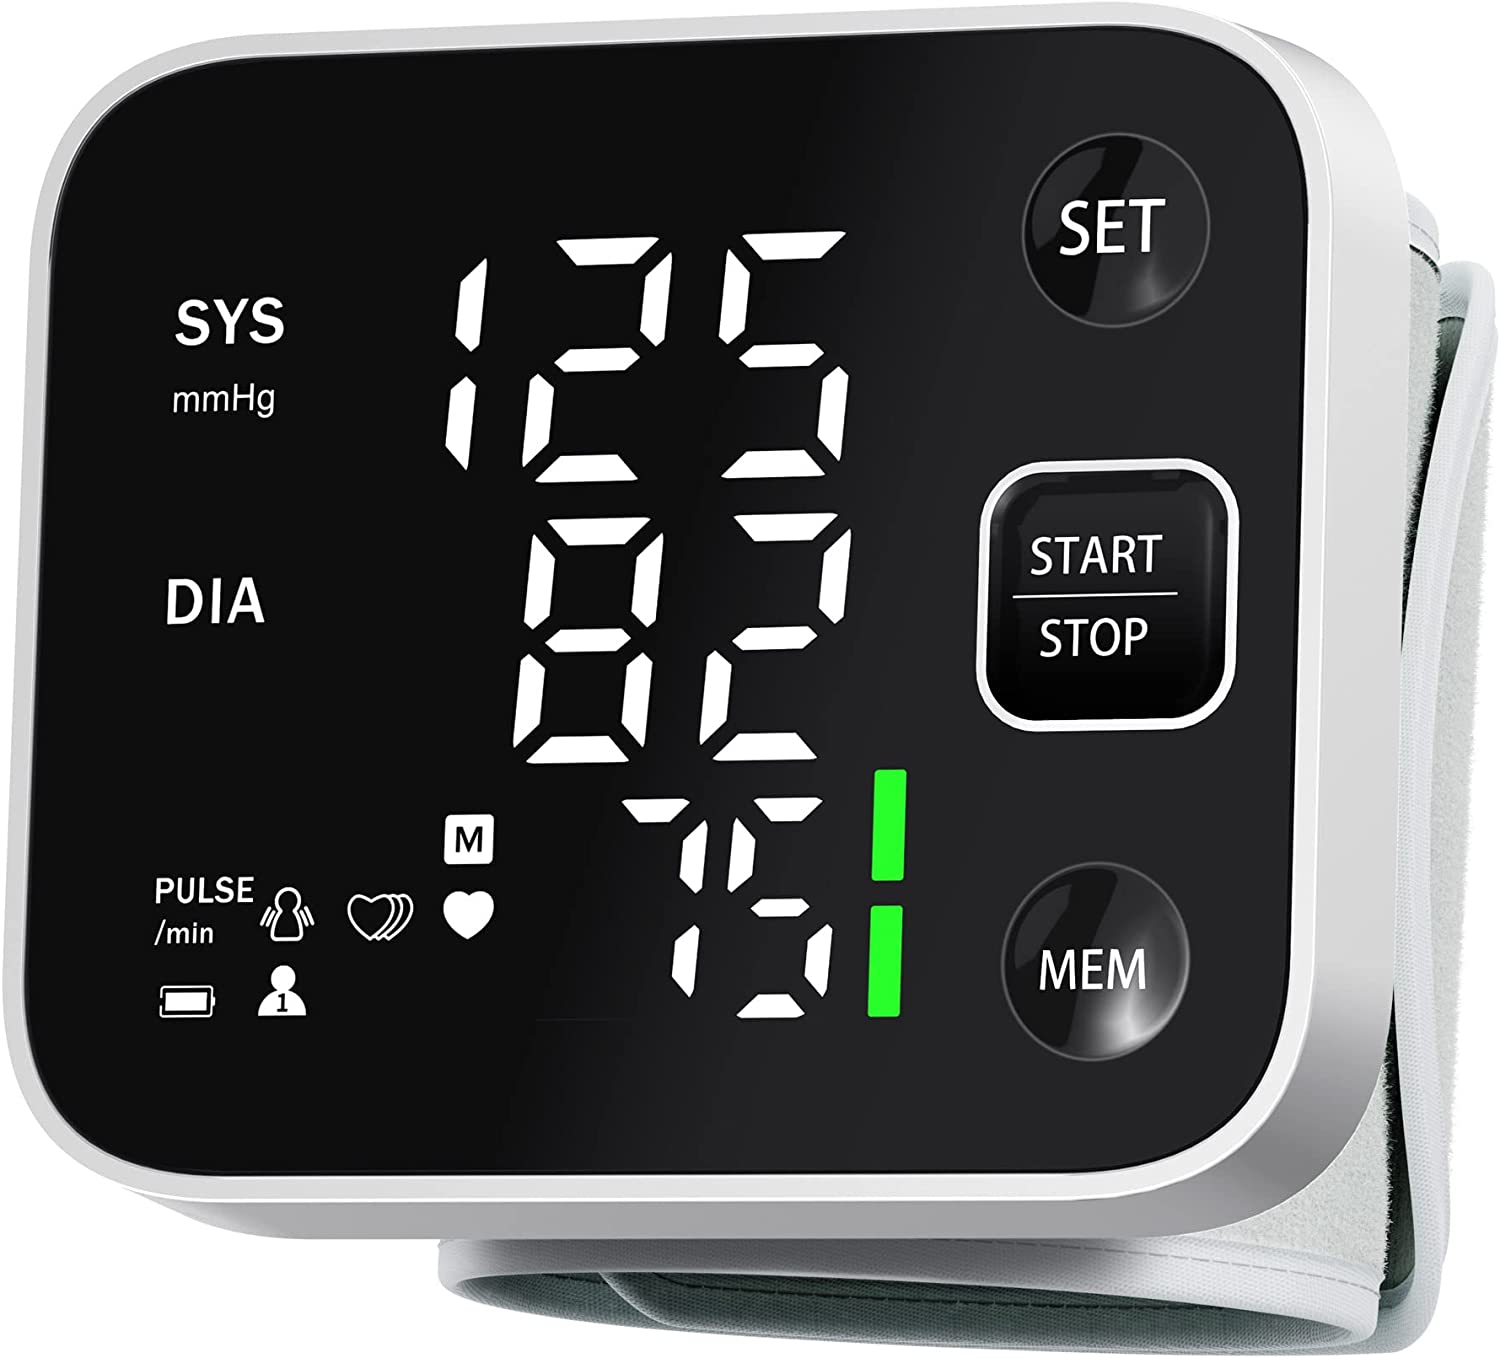 https://www.dontwasteyourmoney.com/wp-content/uploads/2019/12/mmizoo-large-lcd-display-upper-arm-blood-pressure-monitor-1.jpg